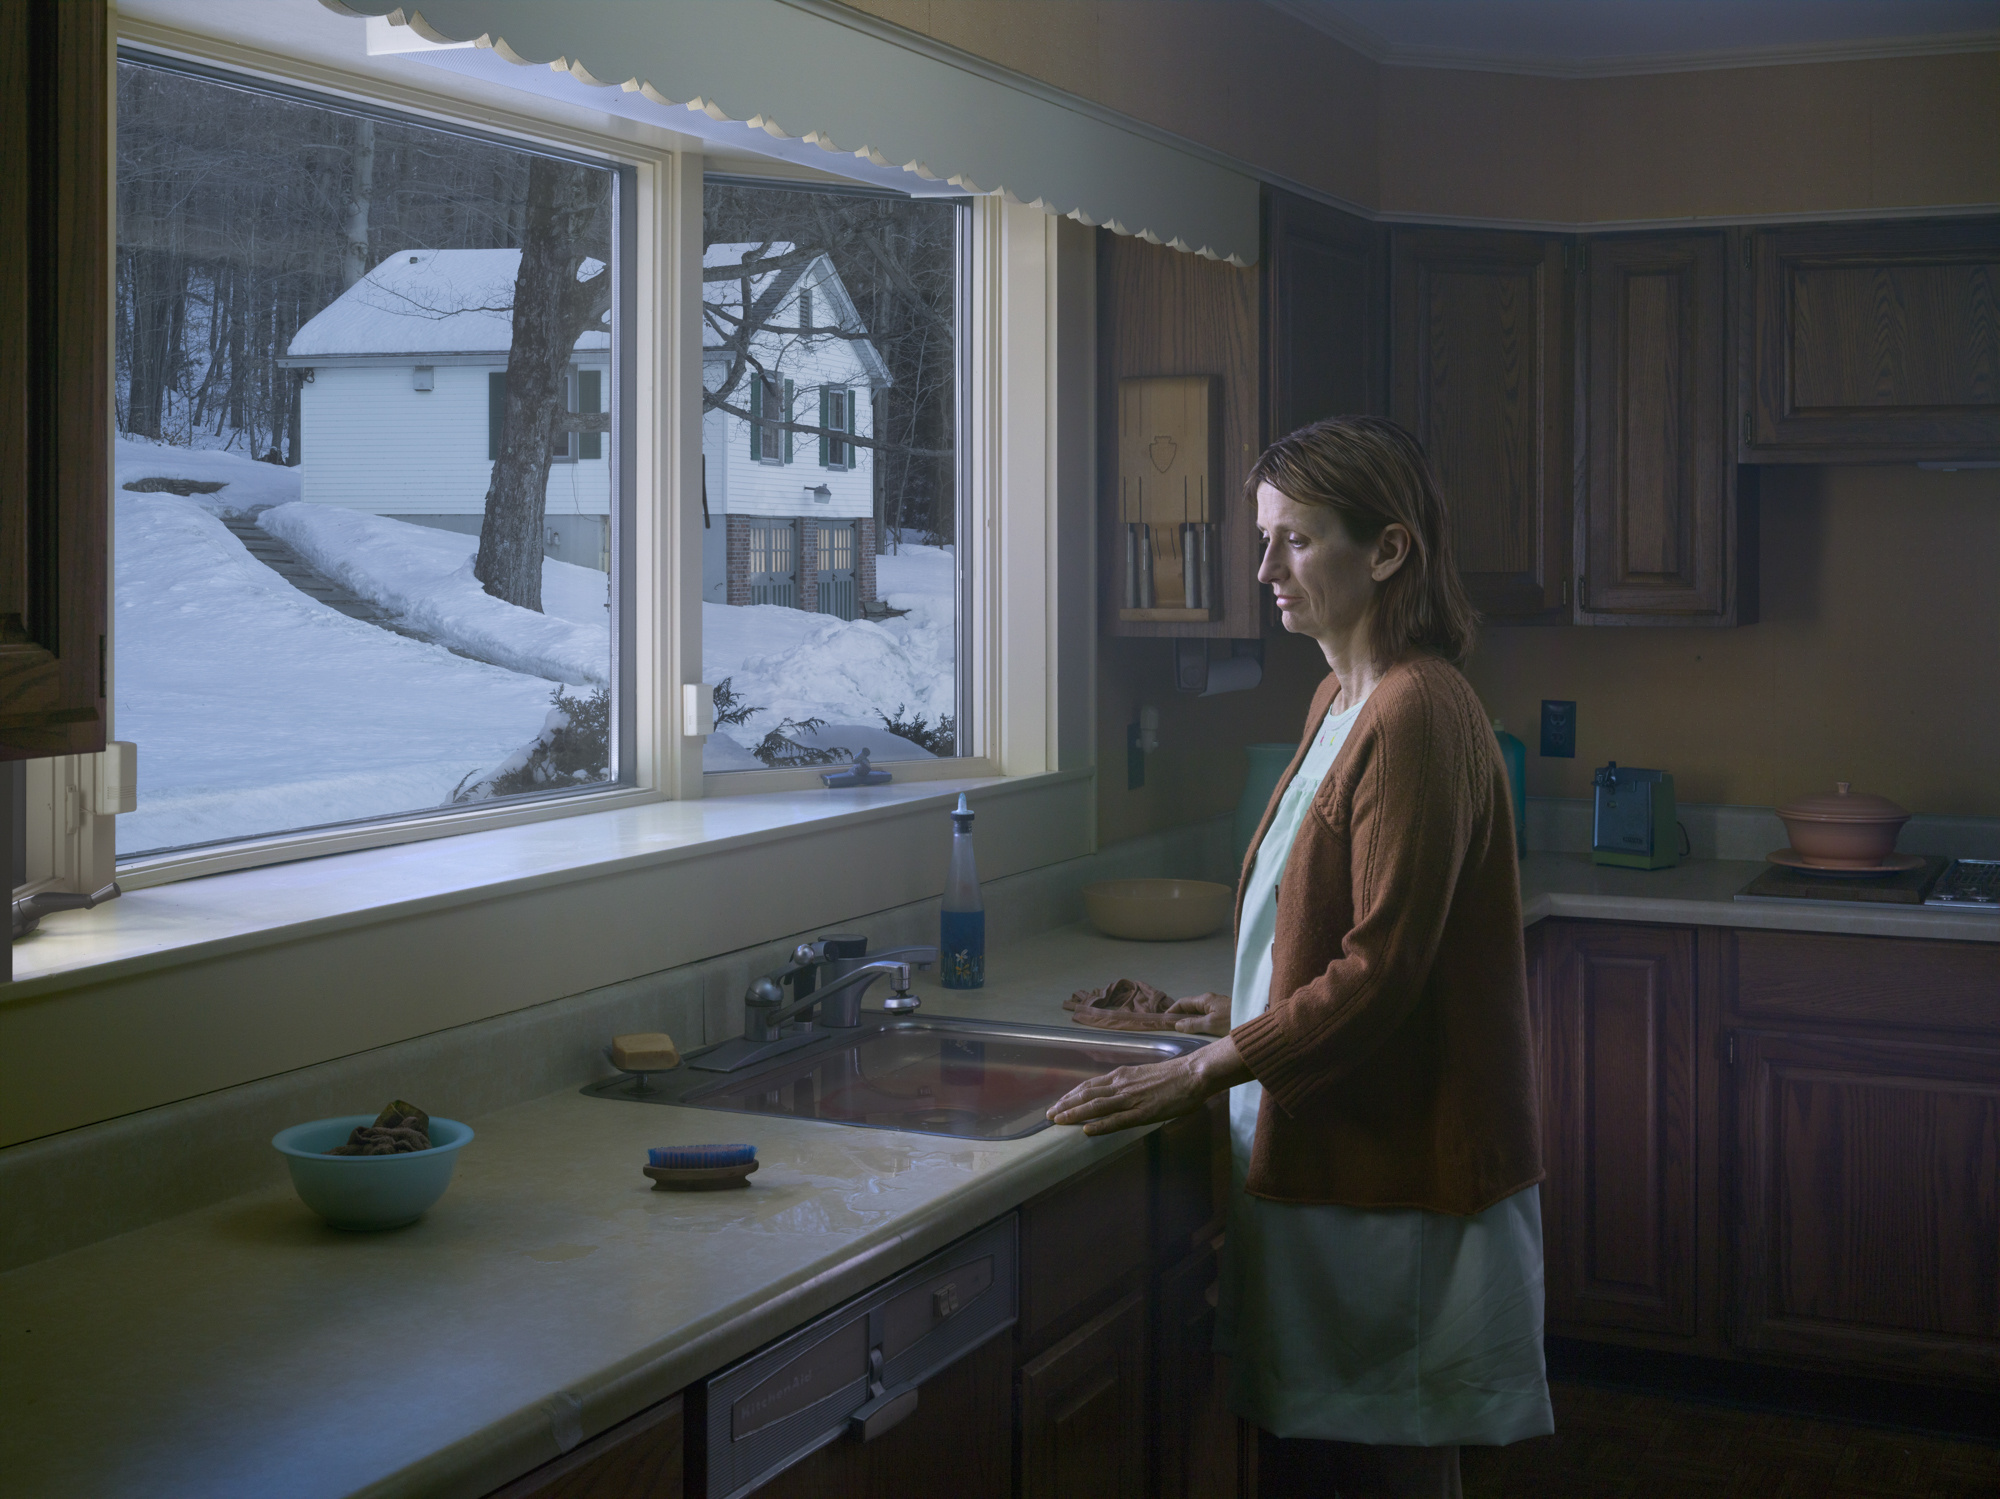 GREGORY CREWDSON, Serie Cathedral of the Pines. Woman at Sink, 2014, Stampa digitale ai pigmenti, dimensione immagine 95,2 × 127 cm © Gregory Crewdson